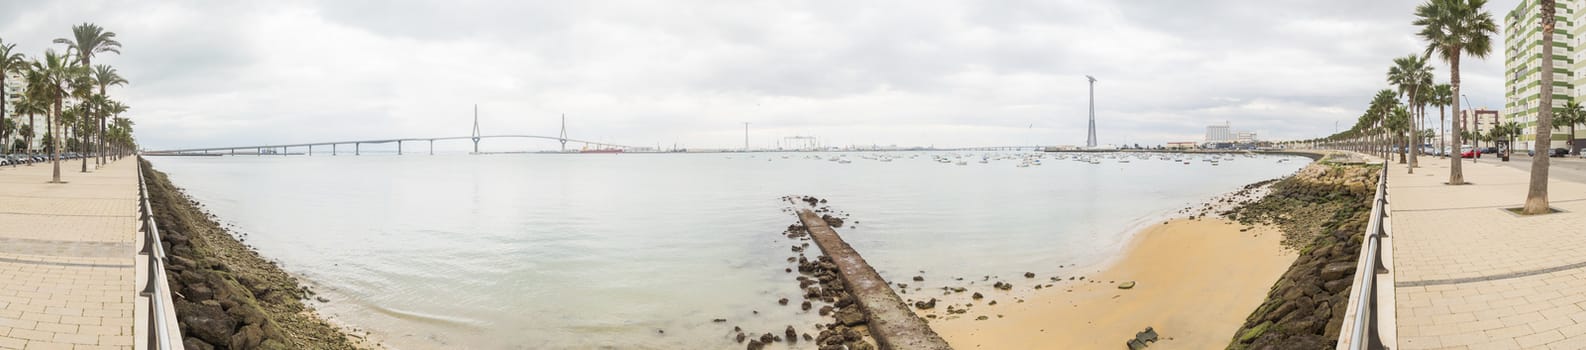 Cadiz bay panoramic view ant the new bridge called Pepa or the 1812 Constitution, Andalucia, Spain